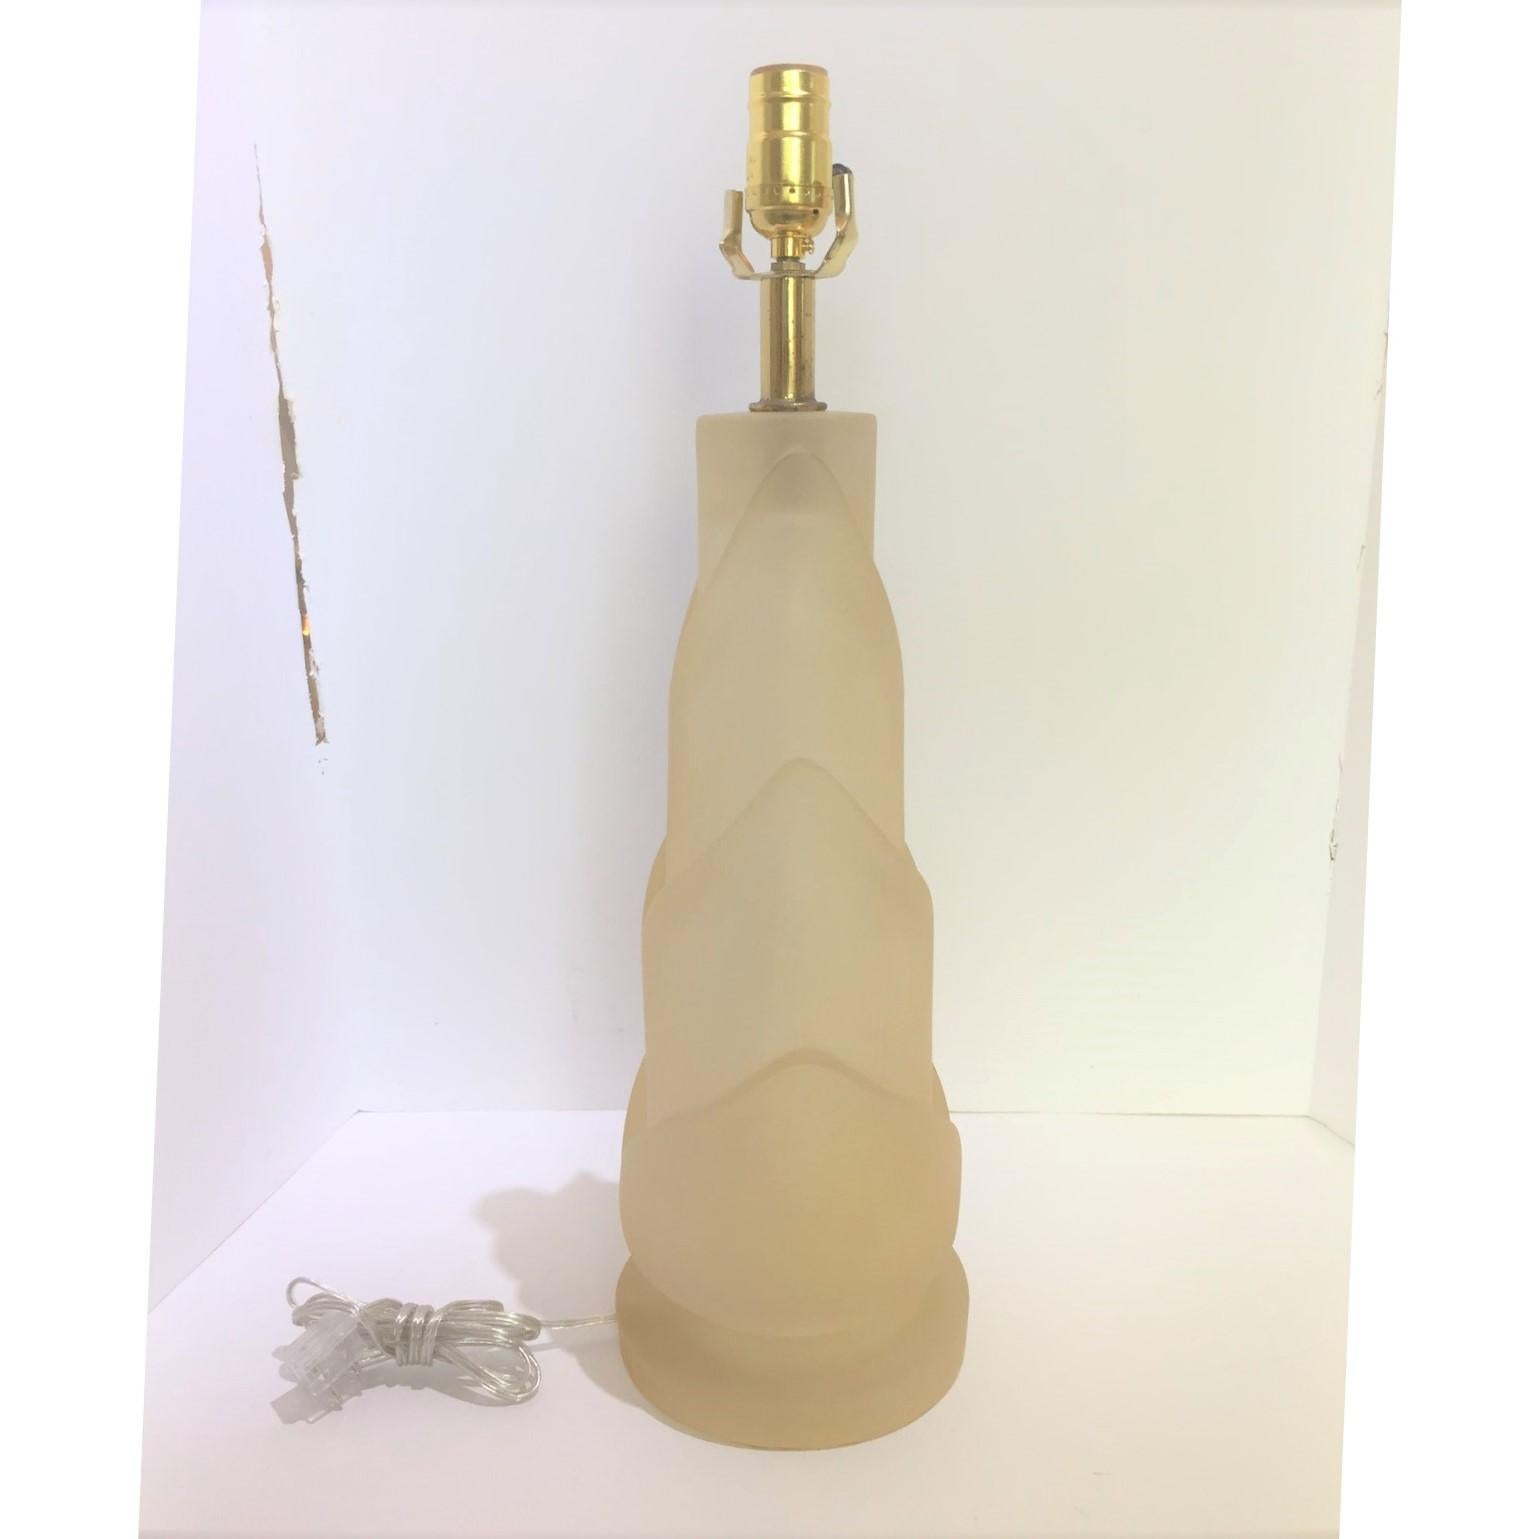 Paolo Gucci Table Lamp In Good Condition For Sale In West Palm Beach, FL